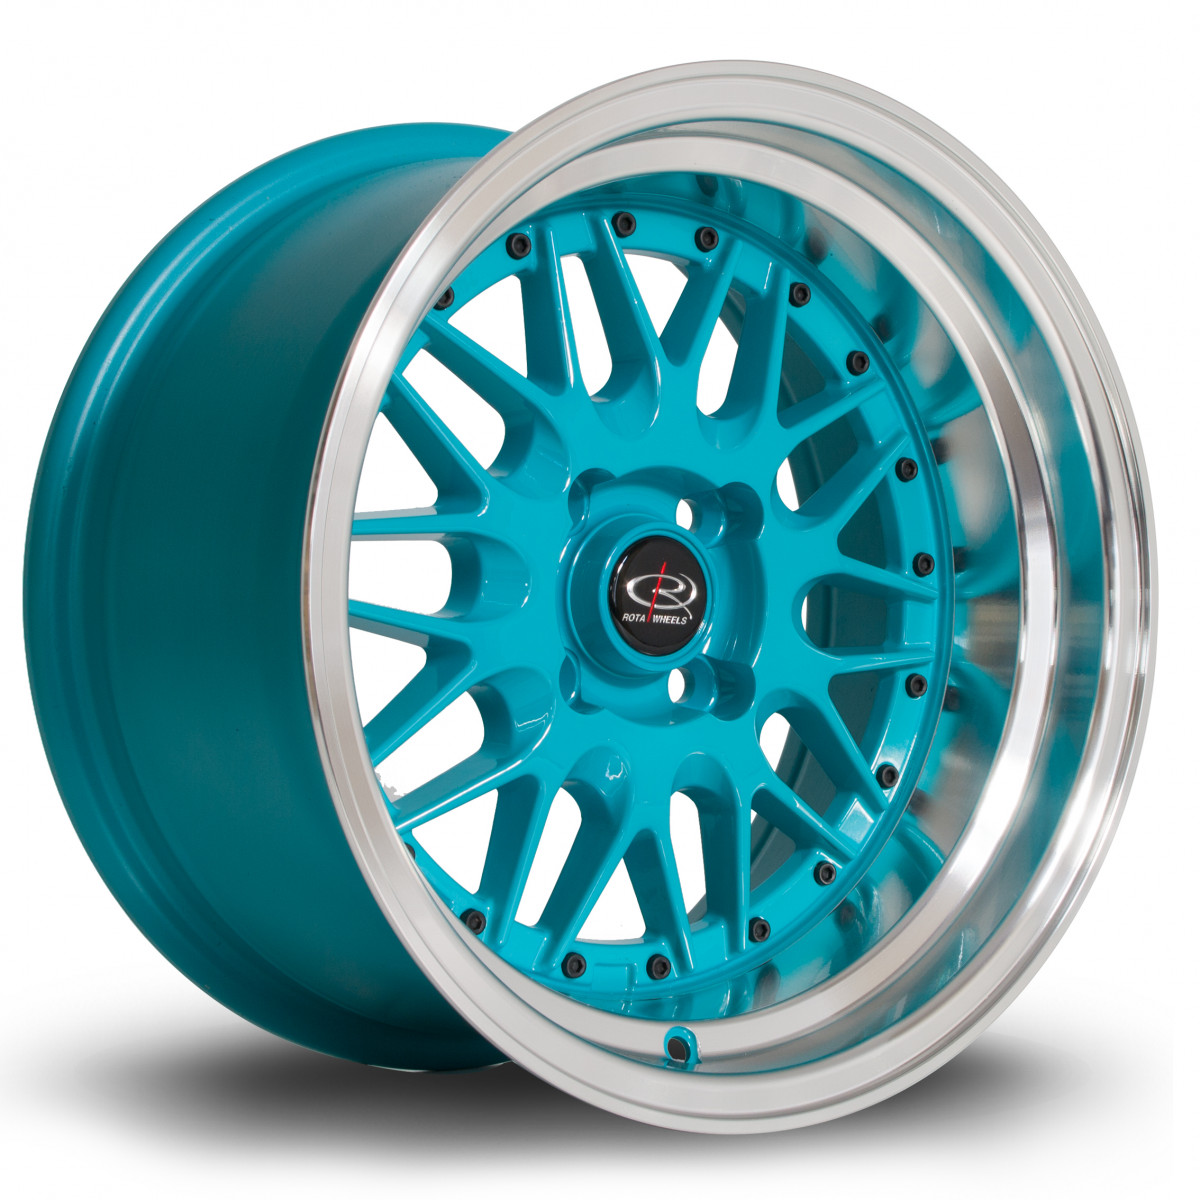 Kensei 15x8 4x100 ET0 Teal with Polished Lip